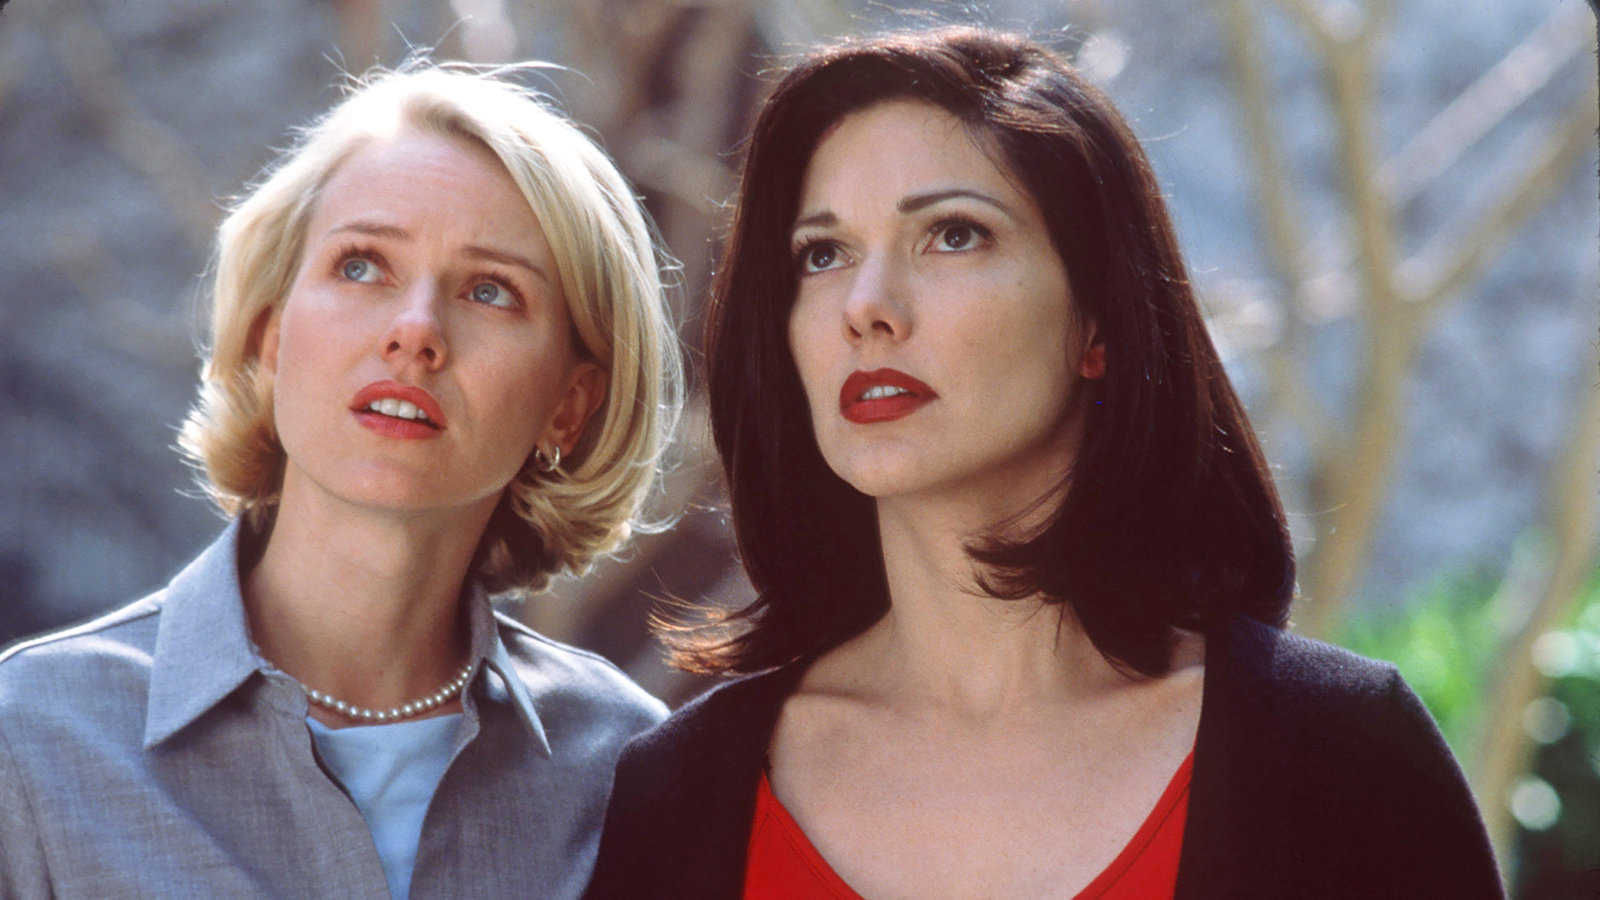 (l to r) Betty (Naomi Watts) and Rita (Laura Elena Harring) in Mulholland Dr. (2001)